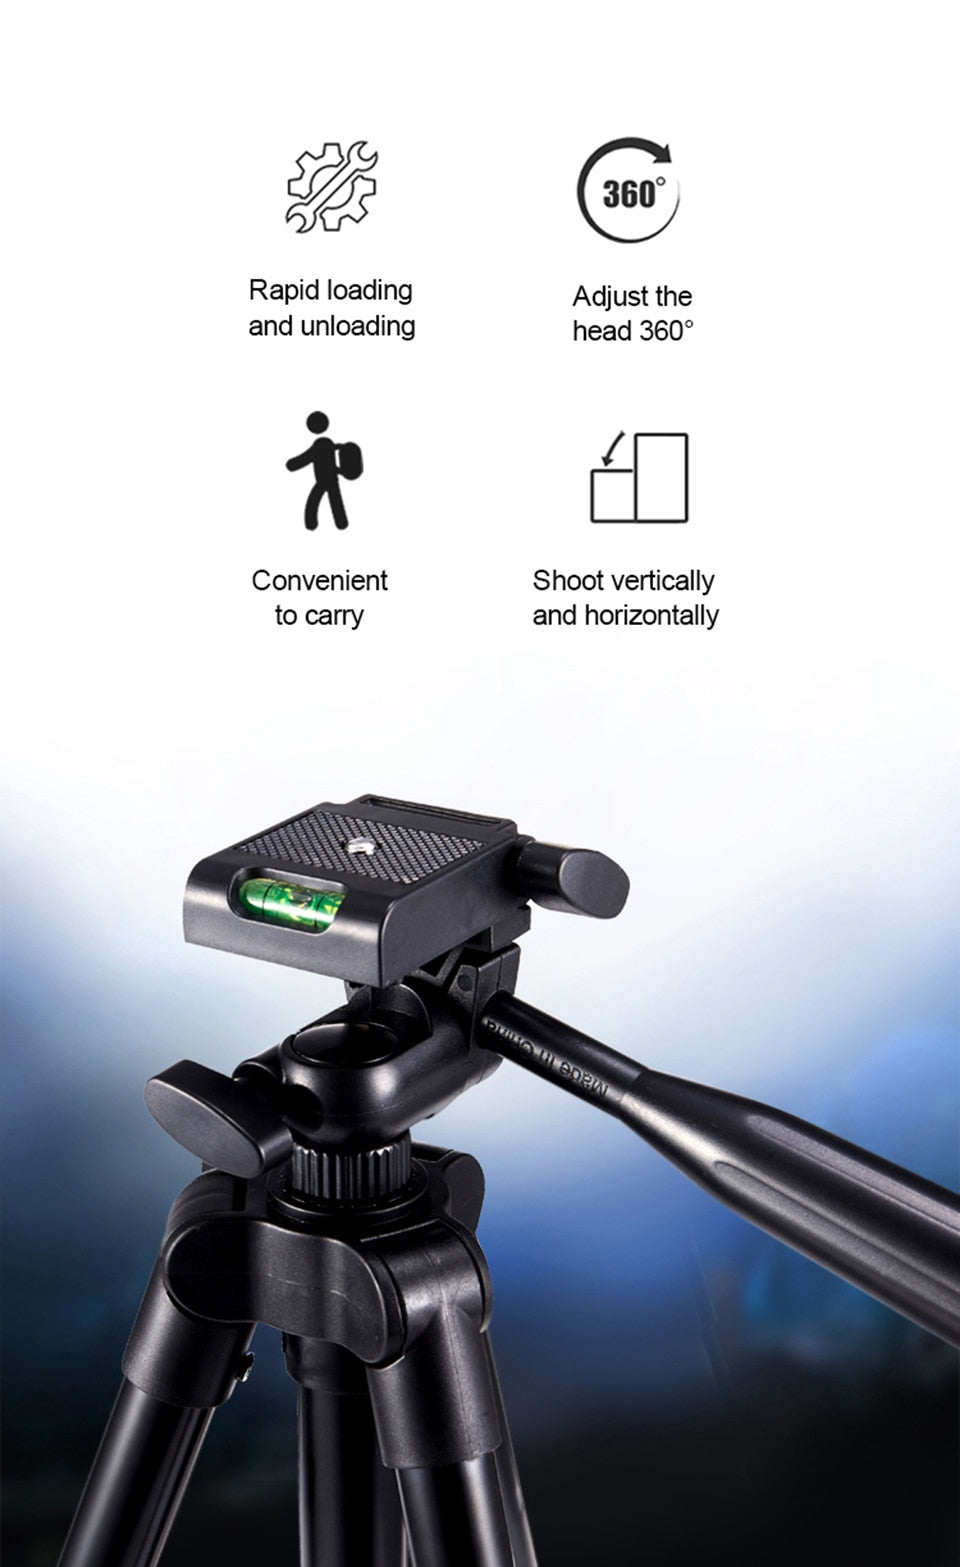 26cm Ringlight - LED Selfie Light with Tripod Stand for Photography. Remote Control